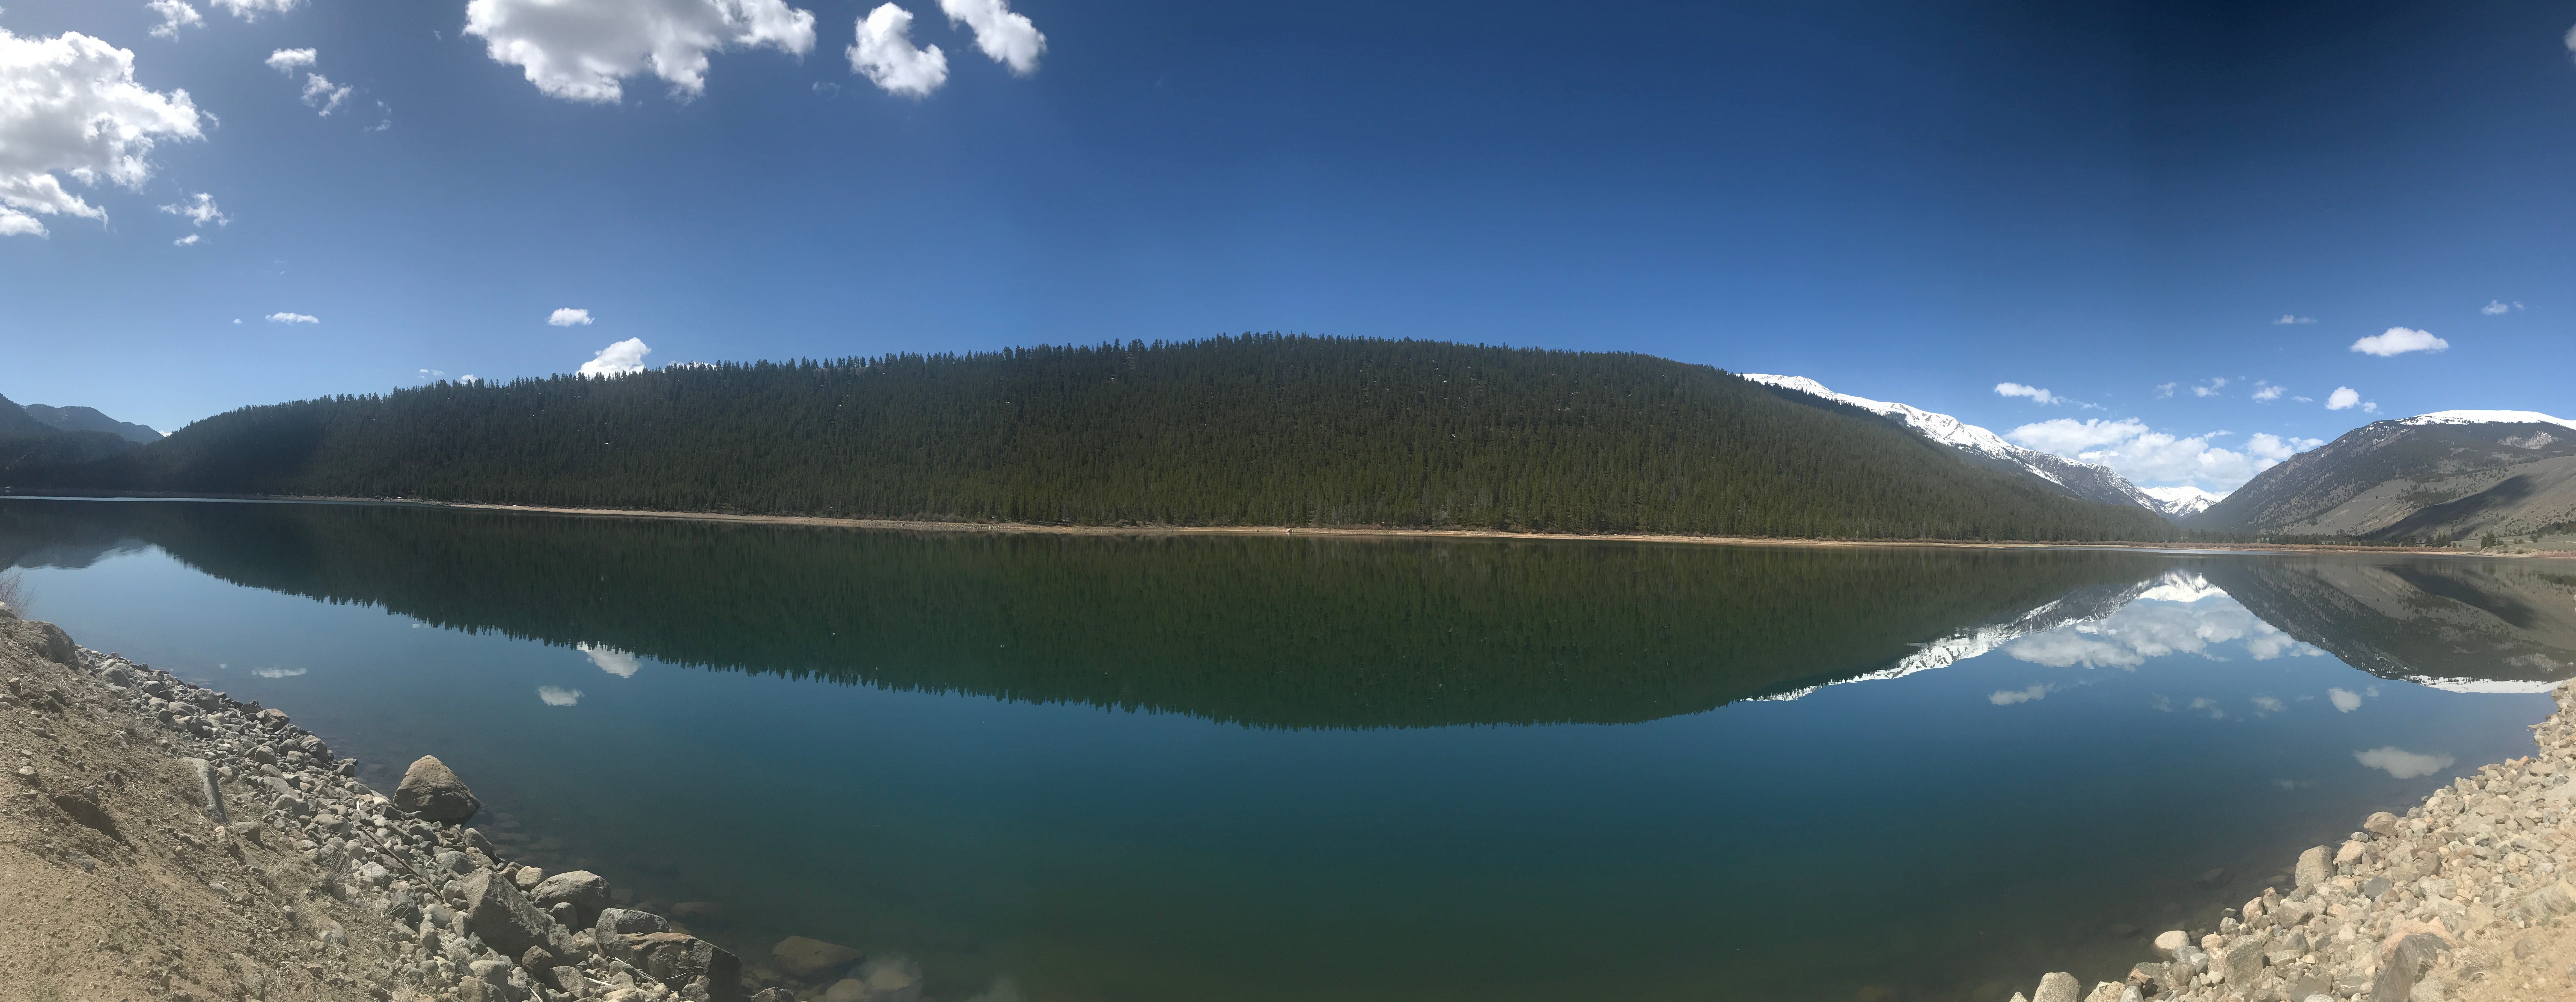 Camper submitted image from Clear Creek Reservoir - 2